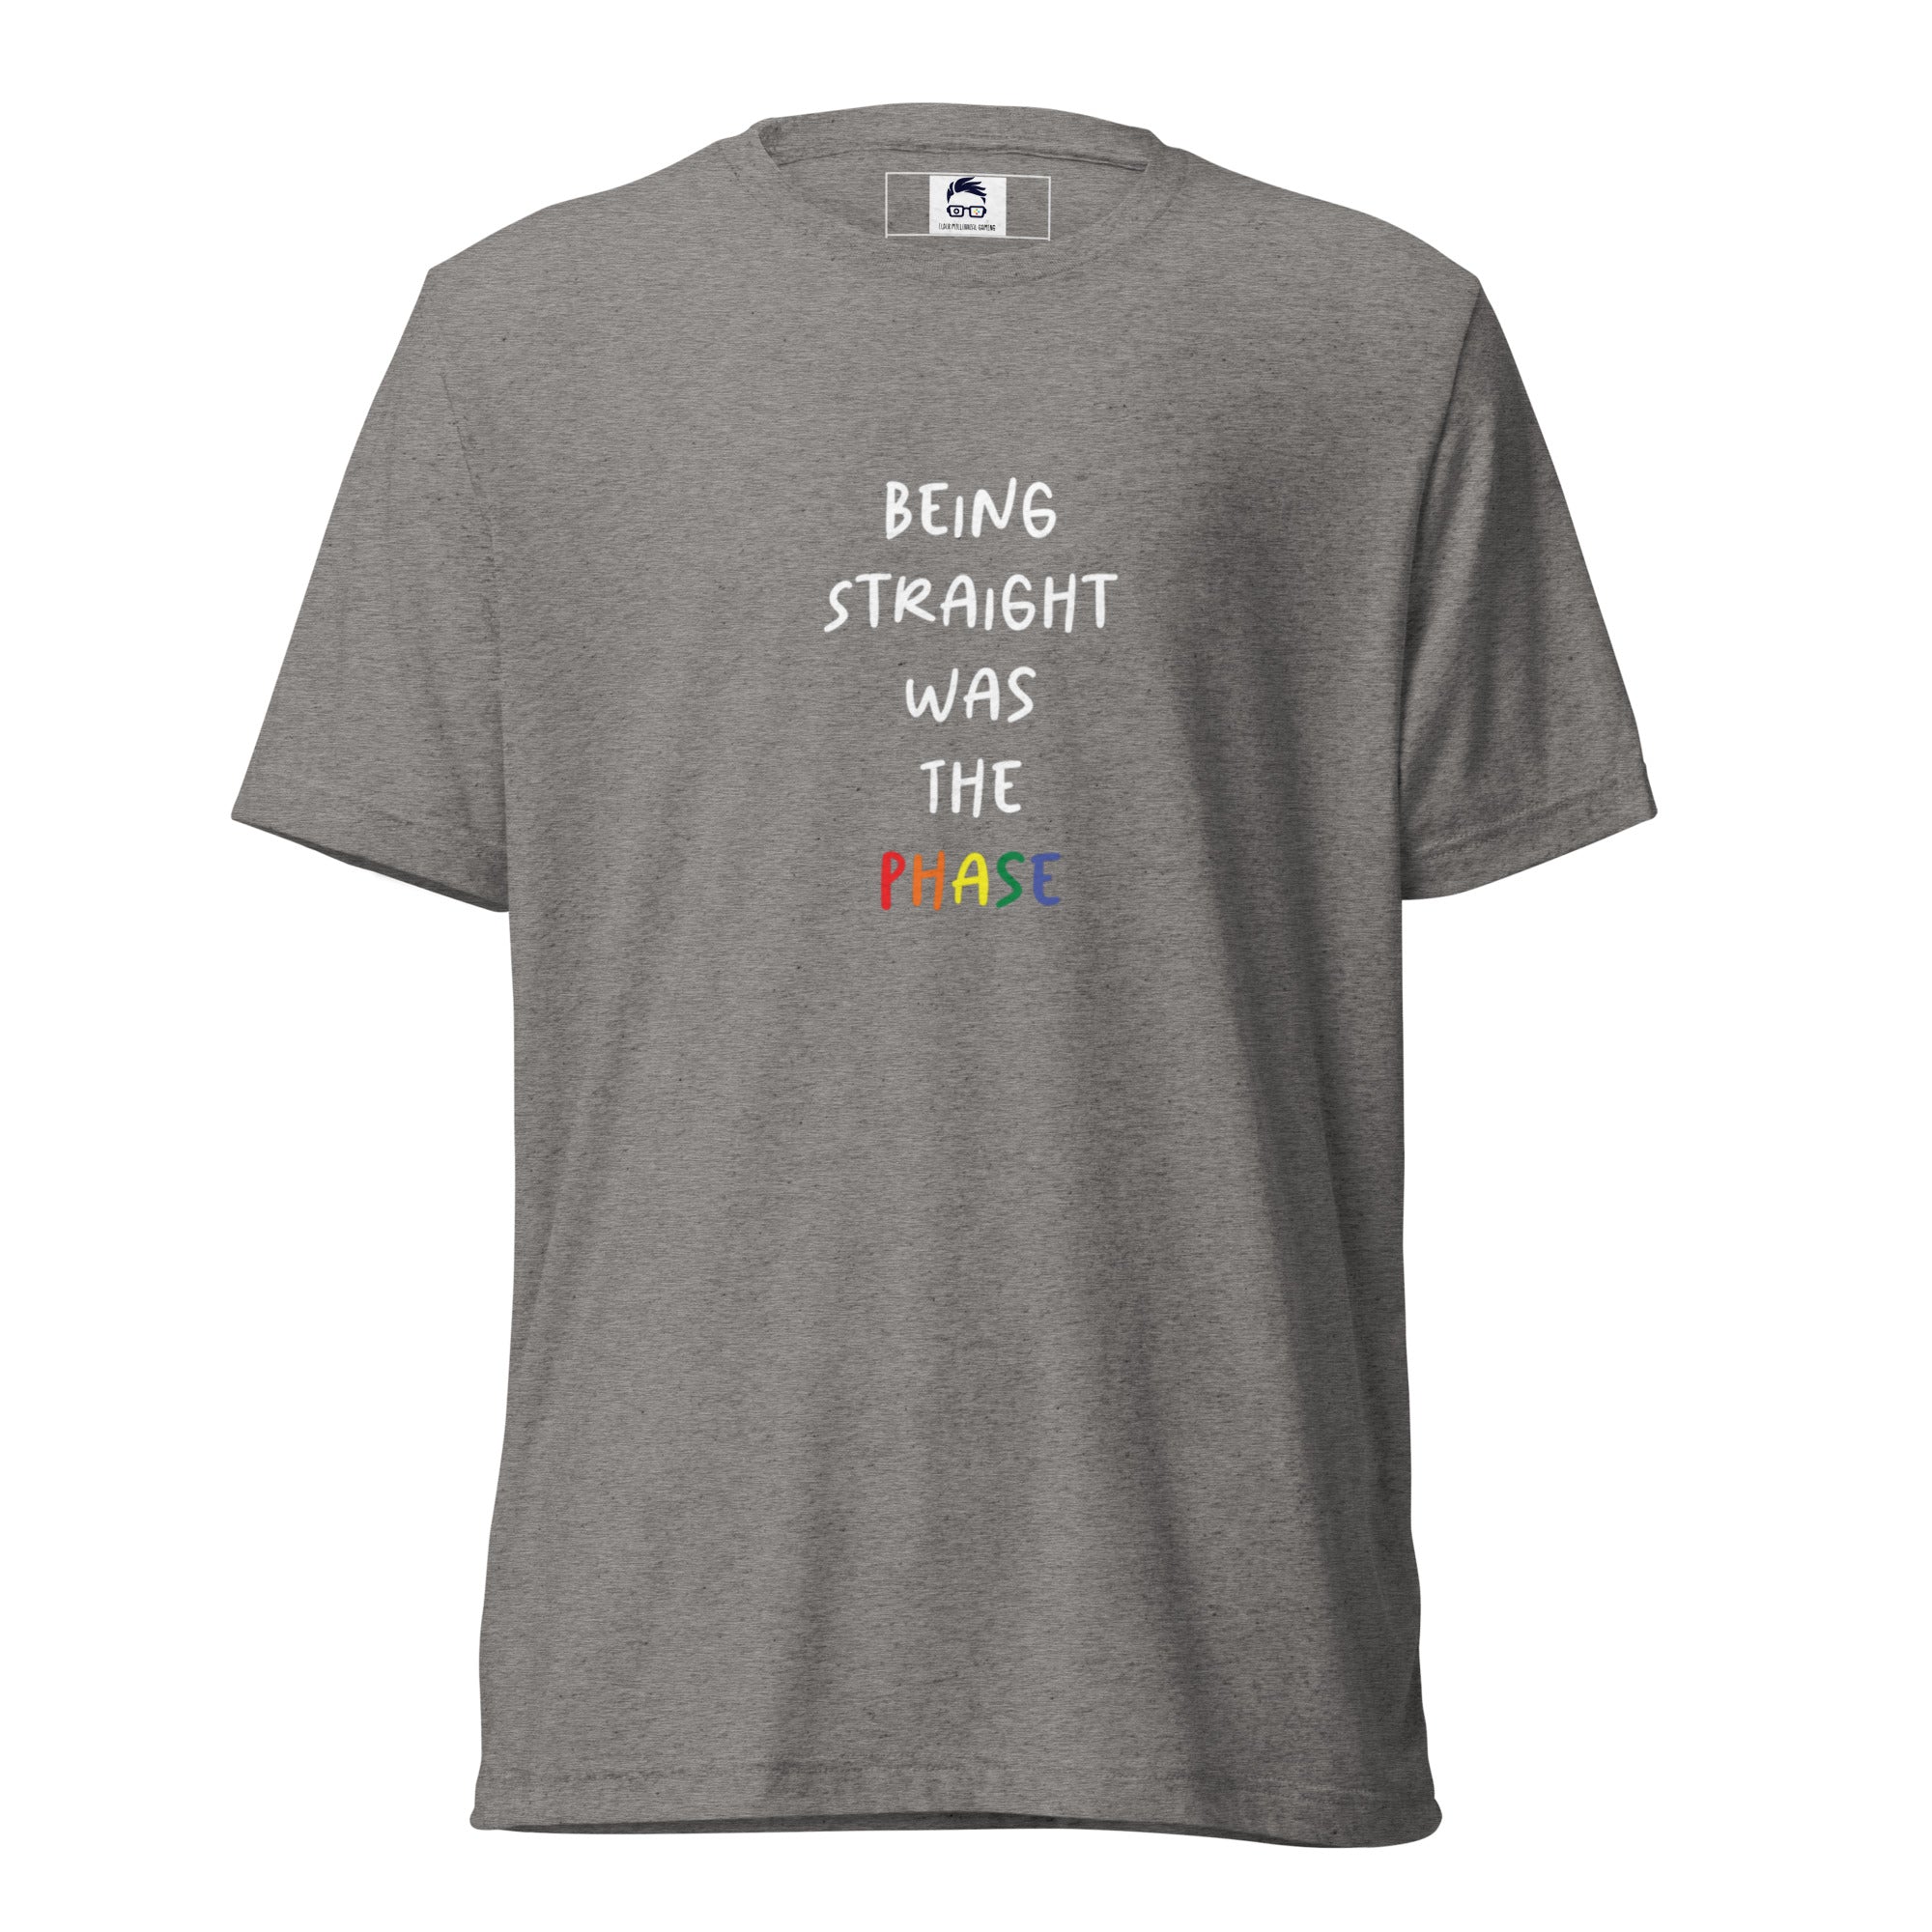 Being Straight Was the Phase Short sleeve t-shirt3P's Inclusive Beauty